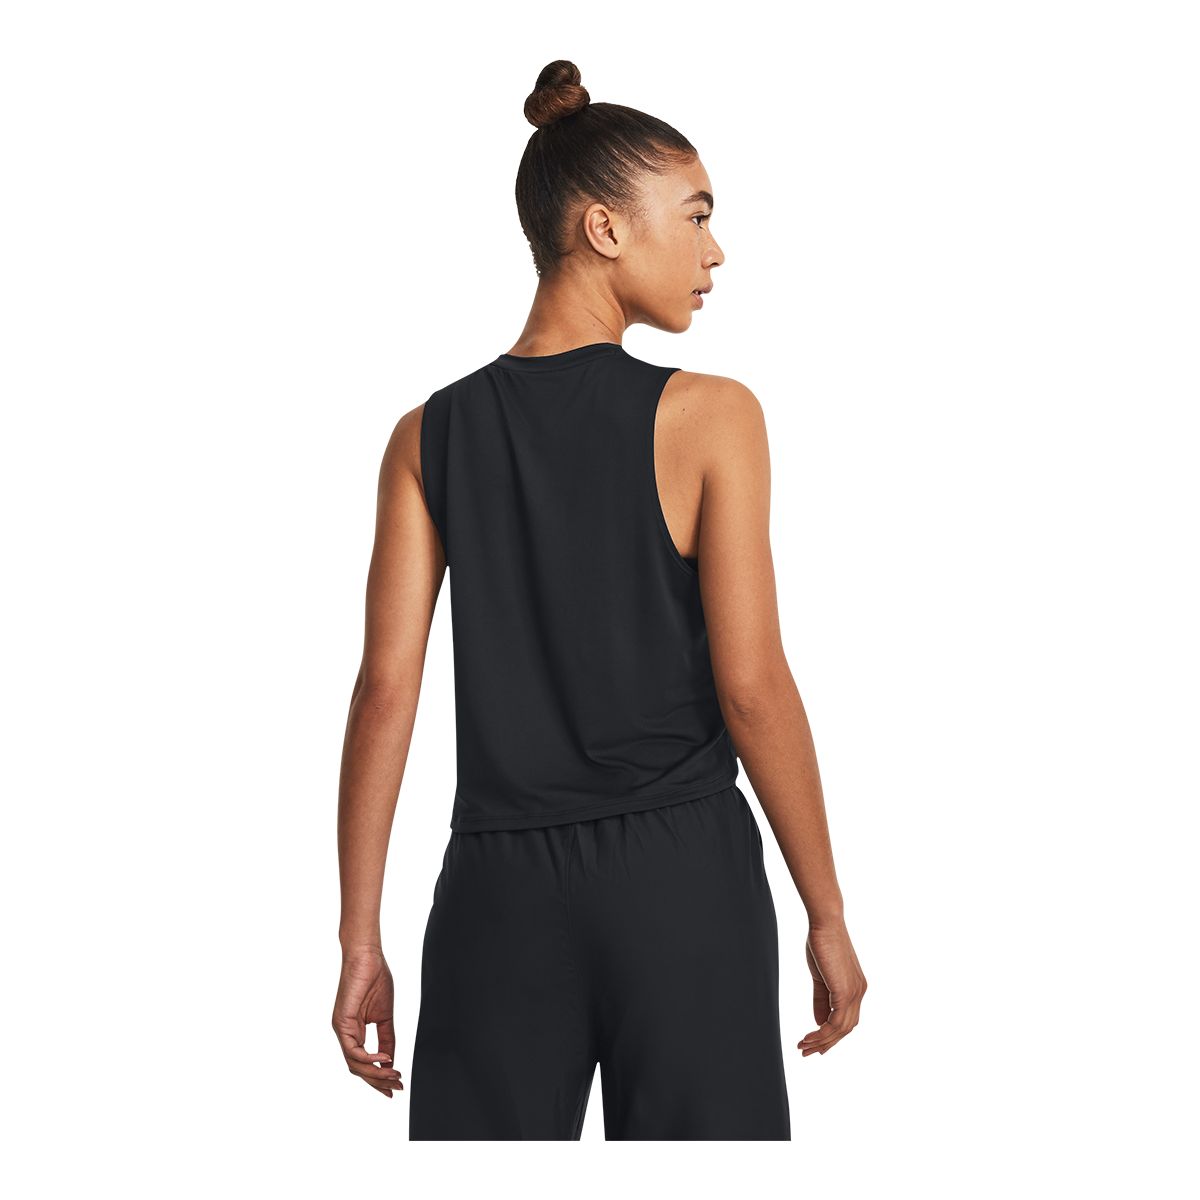 Under Armour Women's RUSH Energy Cropped Tank Top